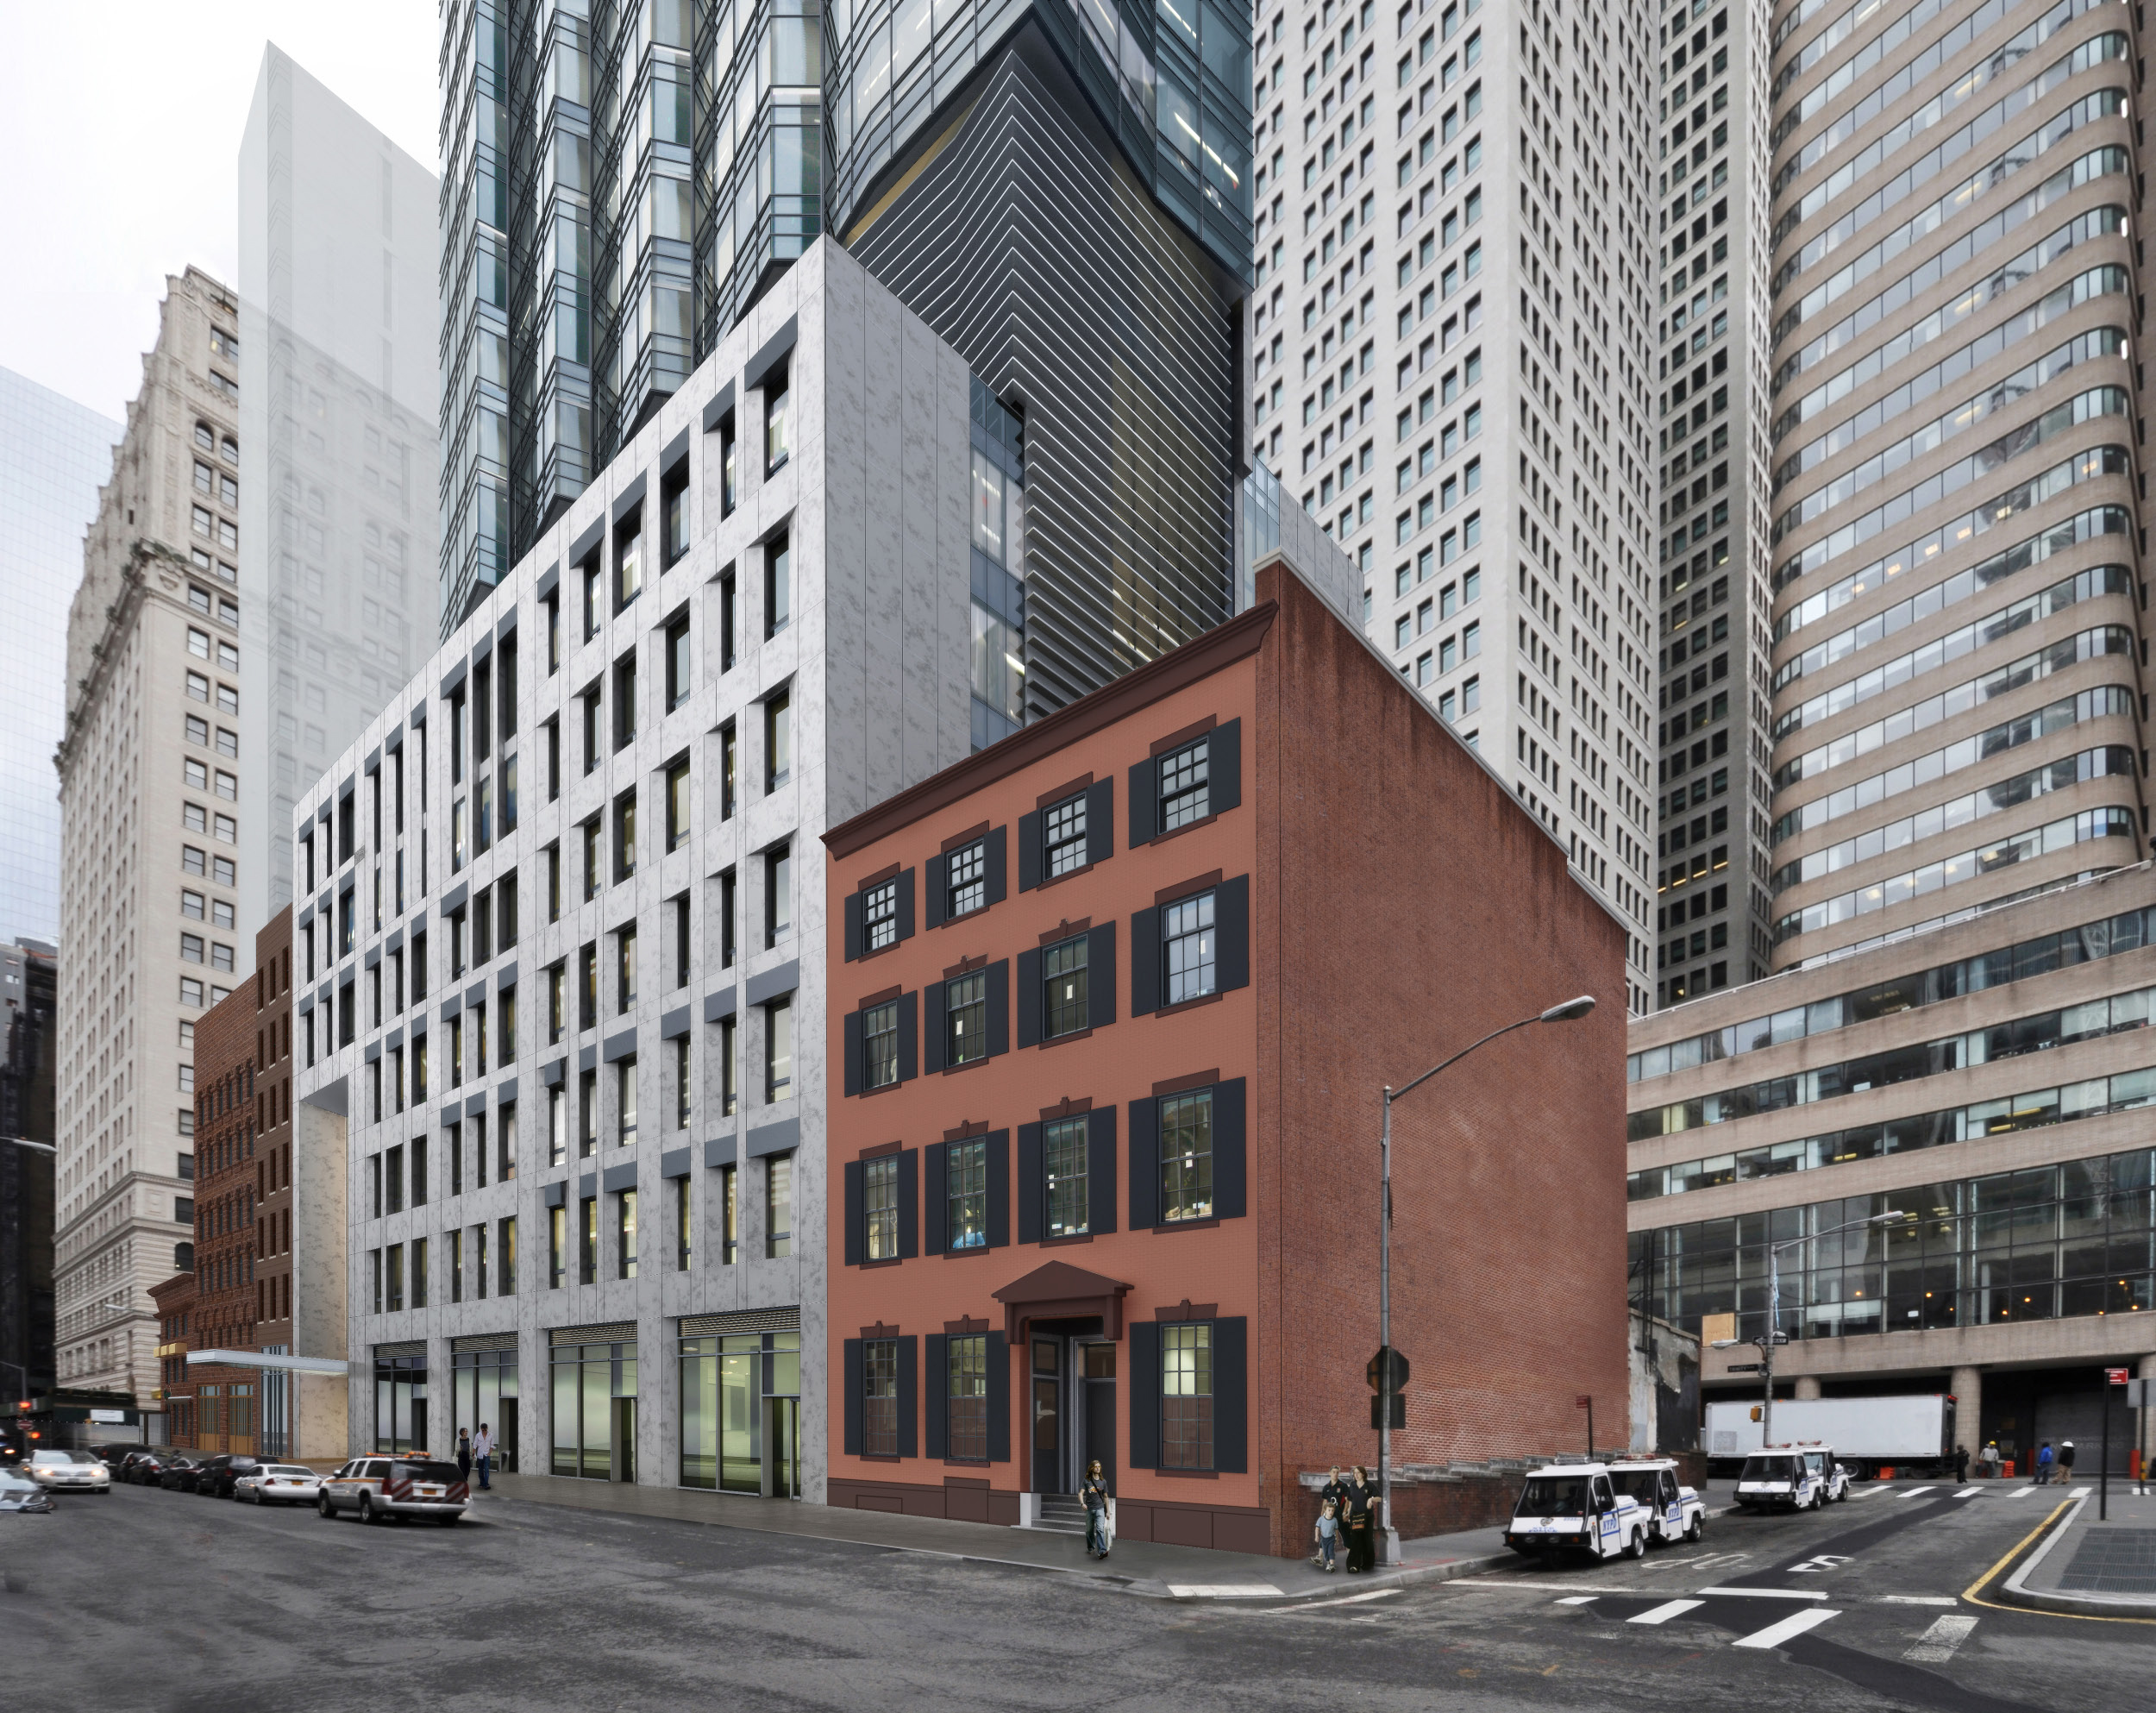 Proposed condition at 67 Greenwich Street with 77 Greenwich Street/42 Trinity Place to the left.